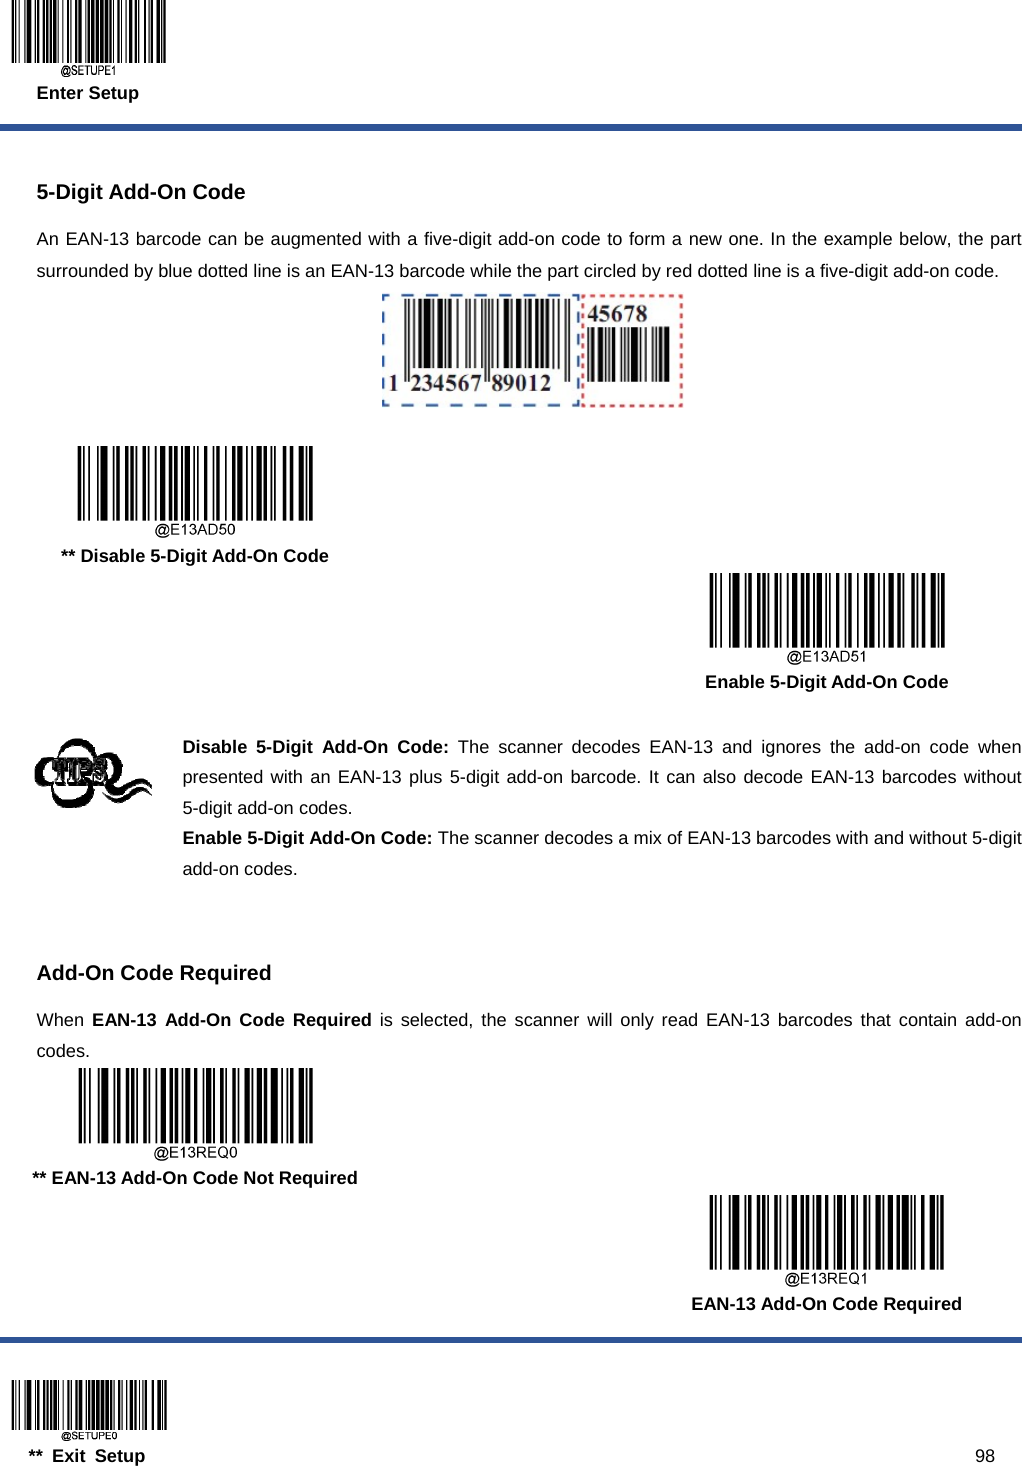  Enter Setup  ** Exit Setup                                                                                           98  5-Digit Add-On Code An EAN-13 barcode can be augmented with a five-digit add-on code to form a new one. In the example below, the part surrounded by blue dotted line is an EAN-13 barcode while the part circled by red dotted line is a five-digit add-on code.      ** Disable 5-Digit Add-On Code      Enable 5-Digit Add-On Code  Disable 5-Digit Add-On Code: The scanner decodes EAN-13 and ignores the add-on code when presented with an EAN-13 plus 5-digit add-on barcode. It can also decode EAN-13 barcodes without 5-digit add-on codes. Enable 5-Digit Add-On Code: The scanner decodes a mix of EAN-13 barcodes with and without 5-digit add-on codes.   Add-On Code Required When  EAN-13 Add-On Code Required is selected, the scanner will only read EAN-13 barcodes that contain add-on codes.  ** EAN-13 Add-On Code Not Required      EAN-13 Add-On Code Required 